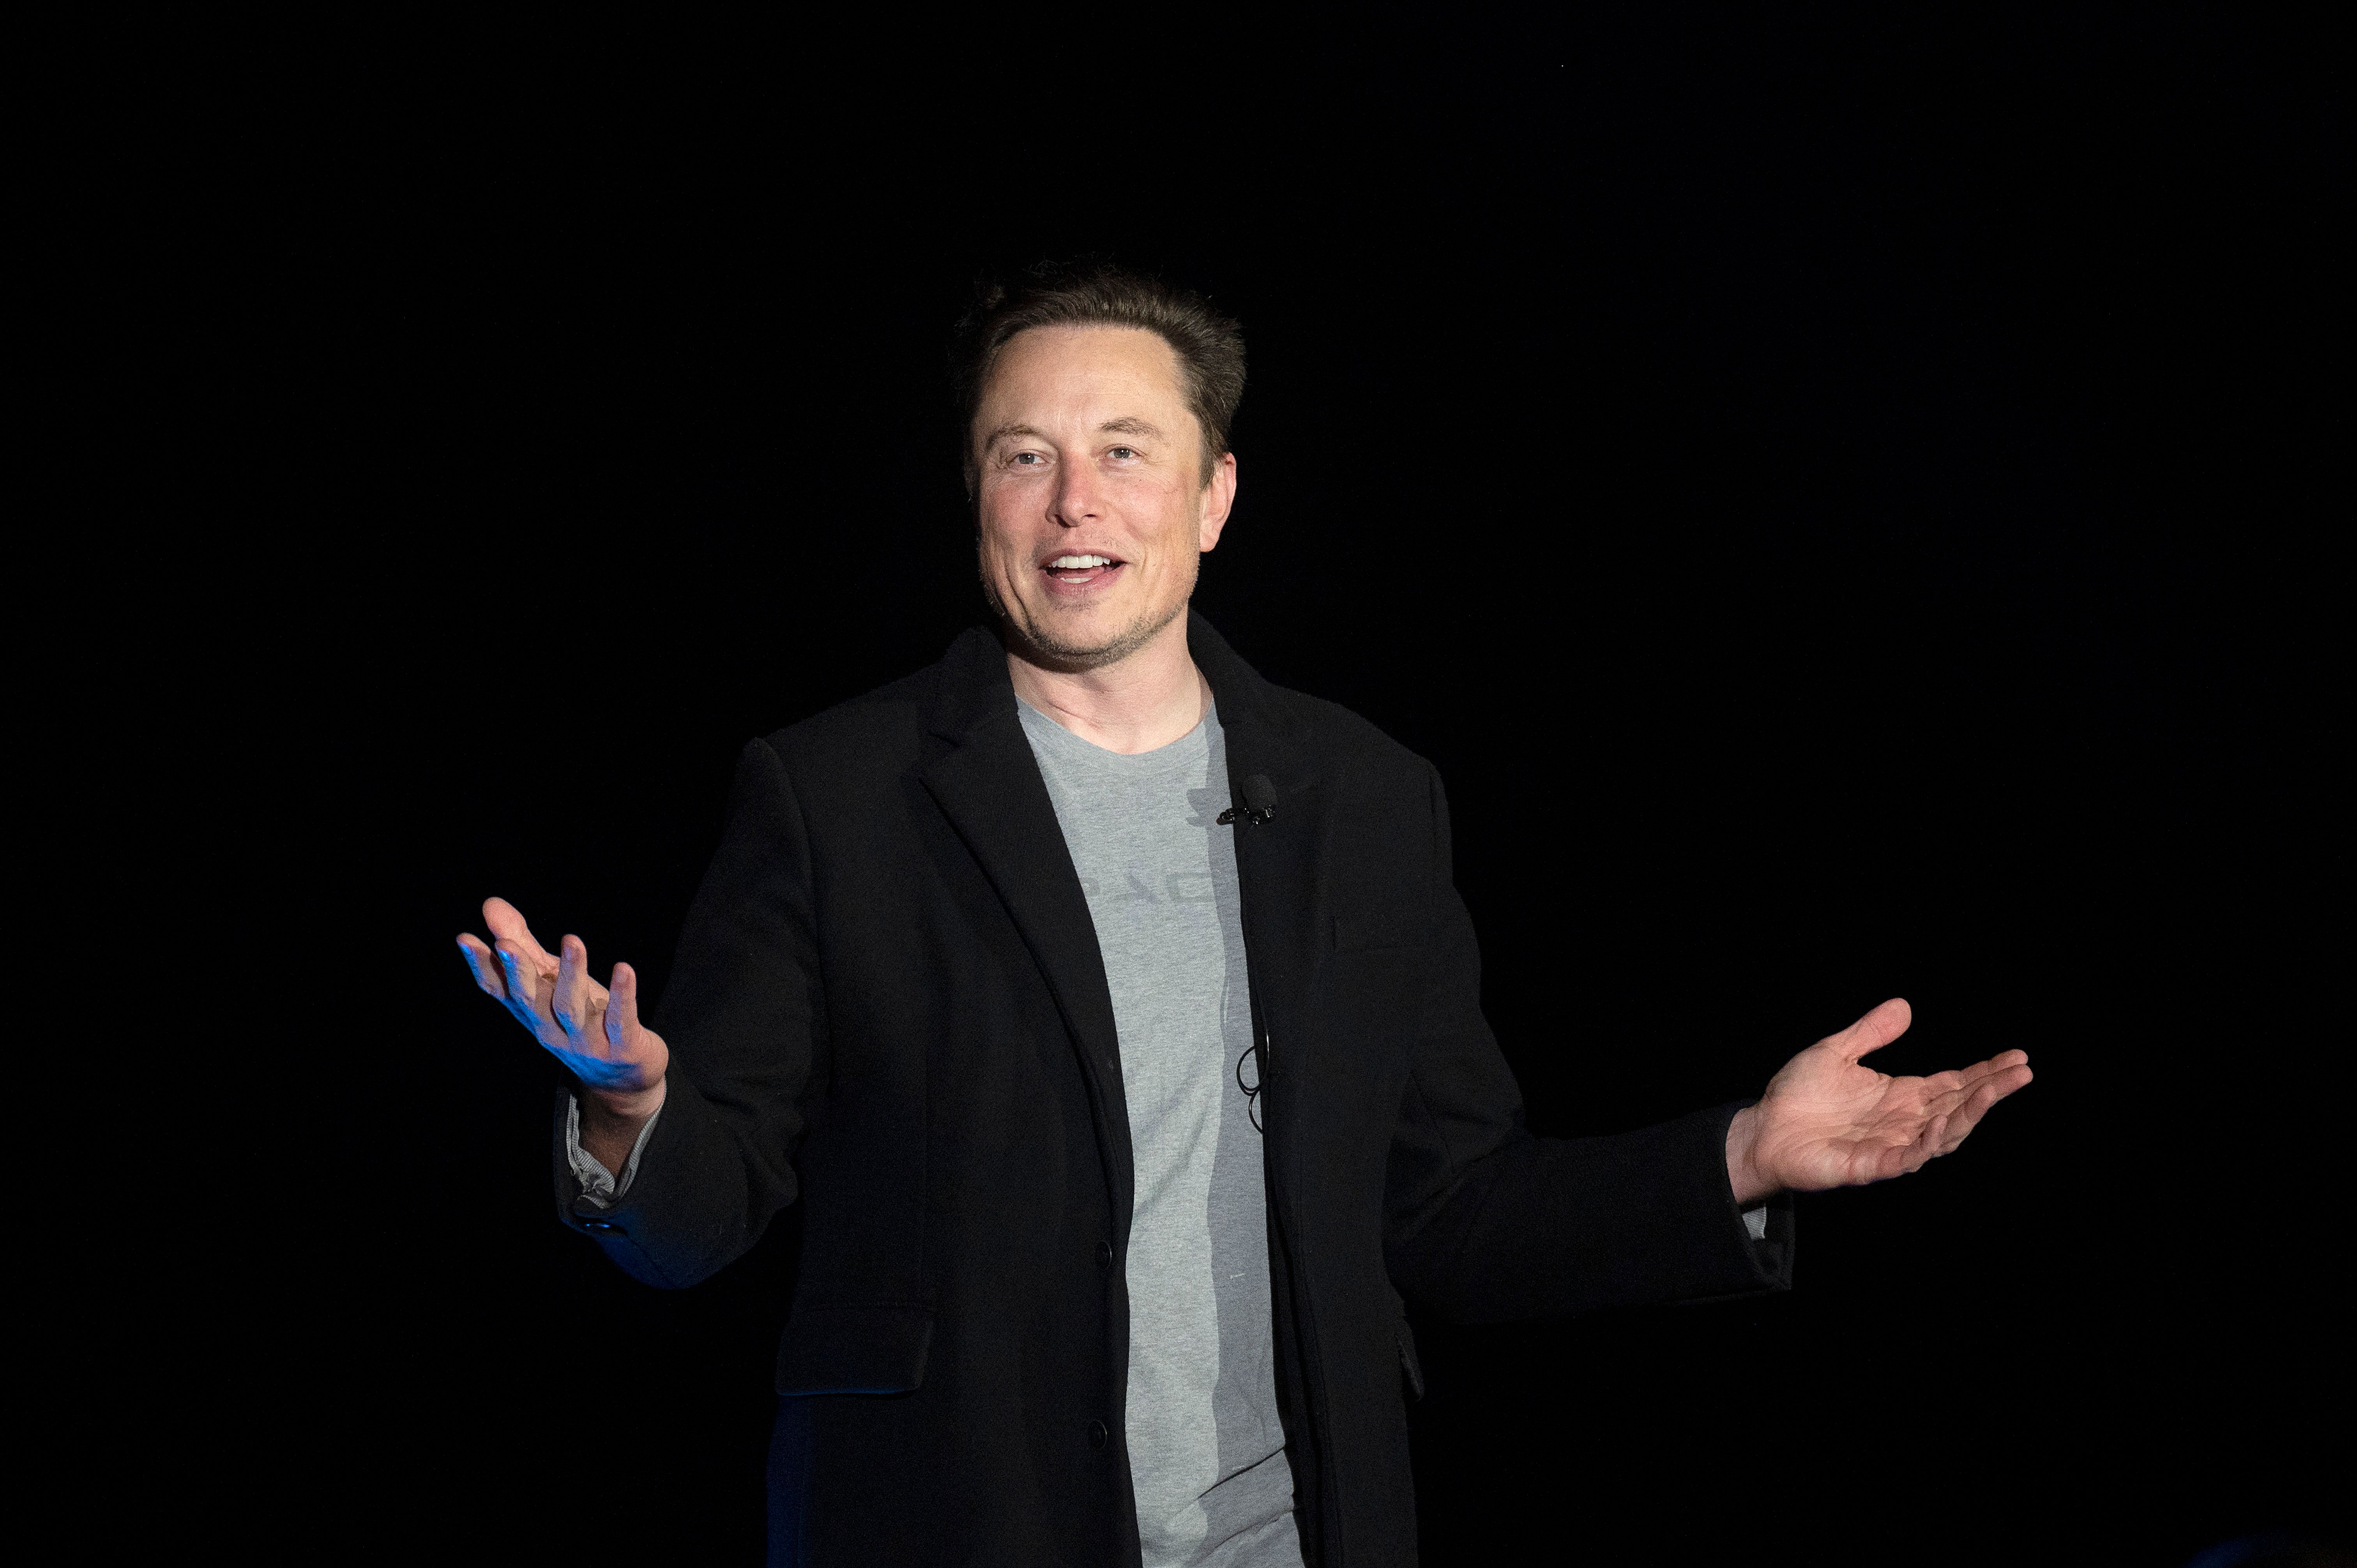 Elon Musk makes a hostile takeover offer for Twitter, but is it too low?